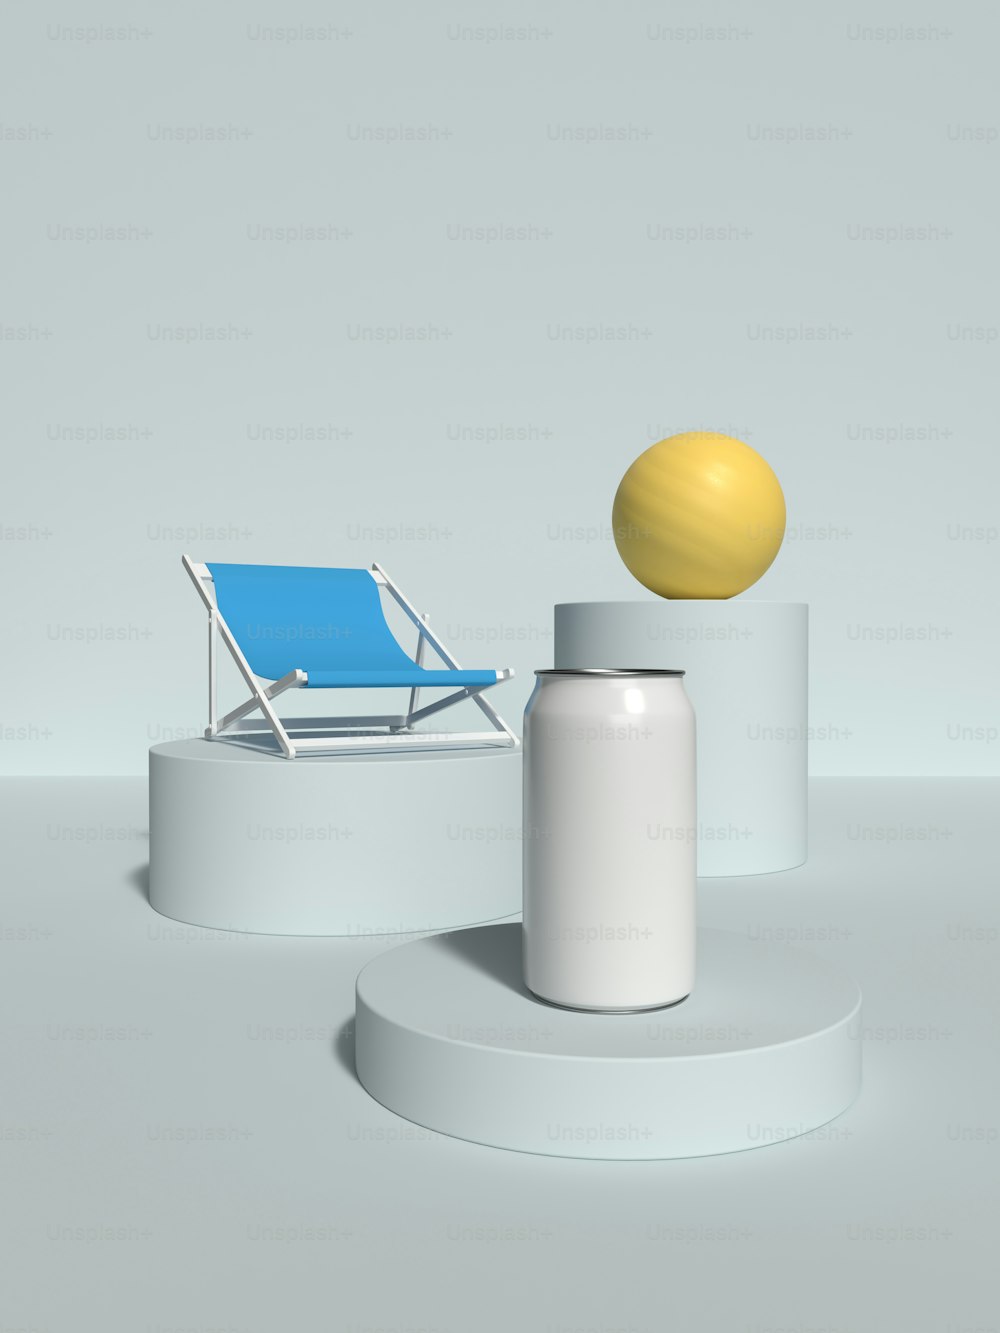 a yellow ball sitting on top of a white stand